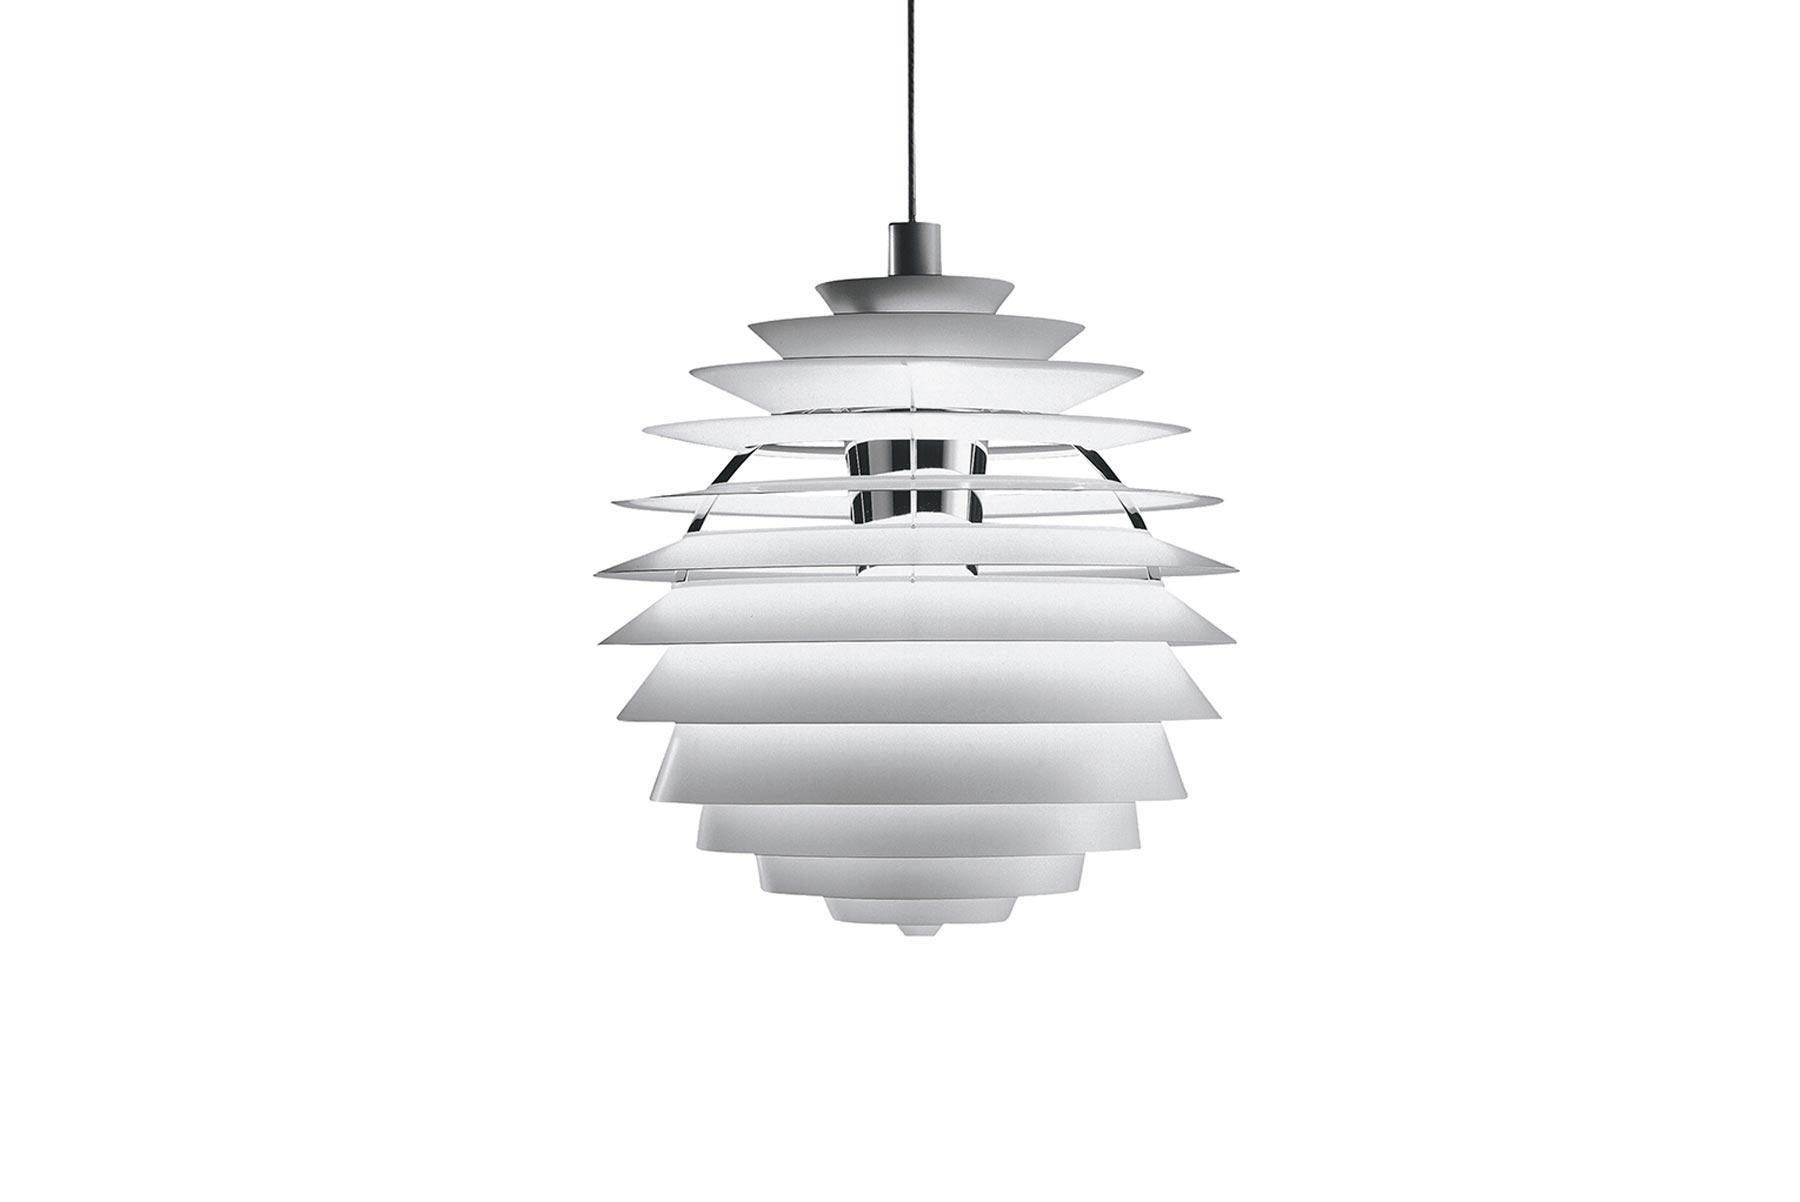 The fixture provides 100% glare-free light. The geometrical, spherical design is based on the principle of illuminating all surfaces at the same angle. This ensures uniform light around the fixture, illuminating both walls and ceiling. Matte painted